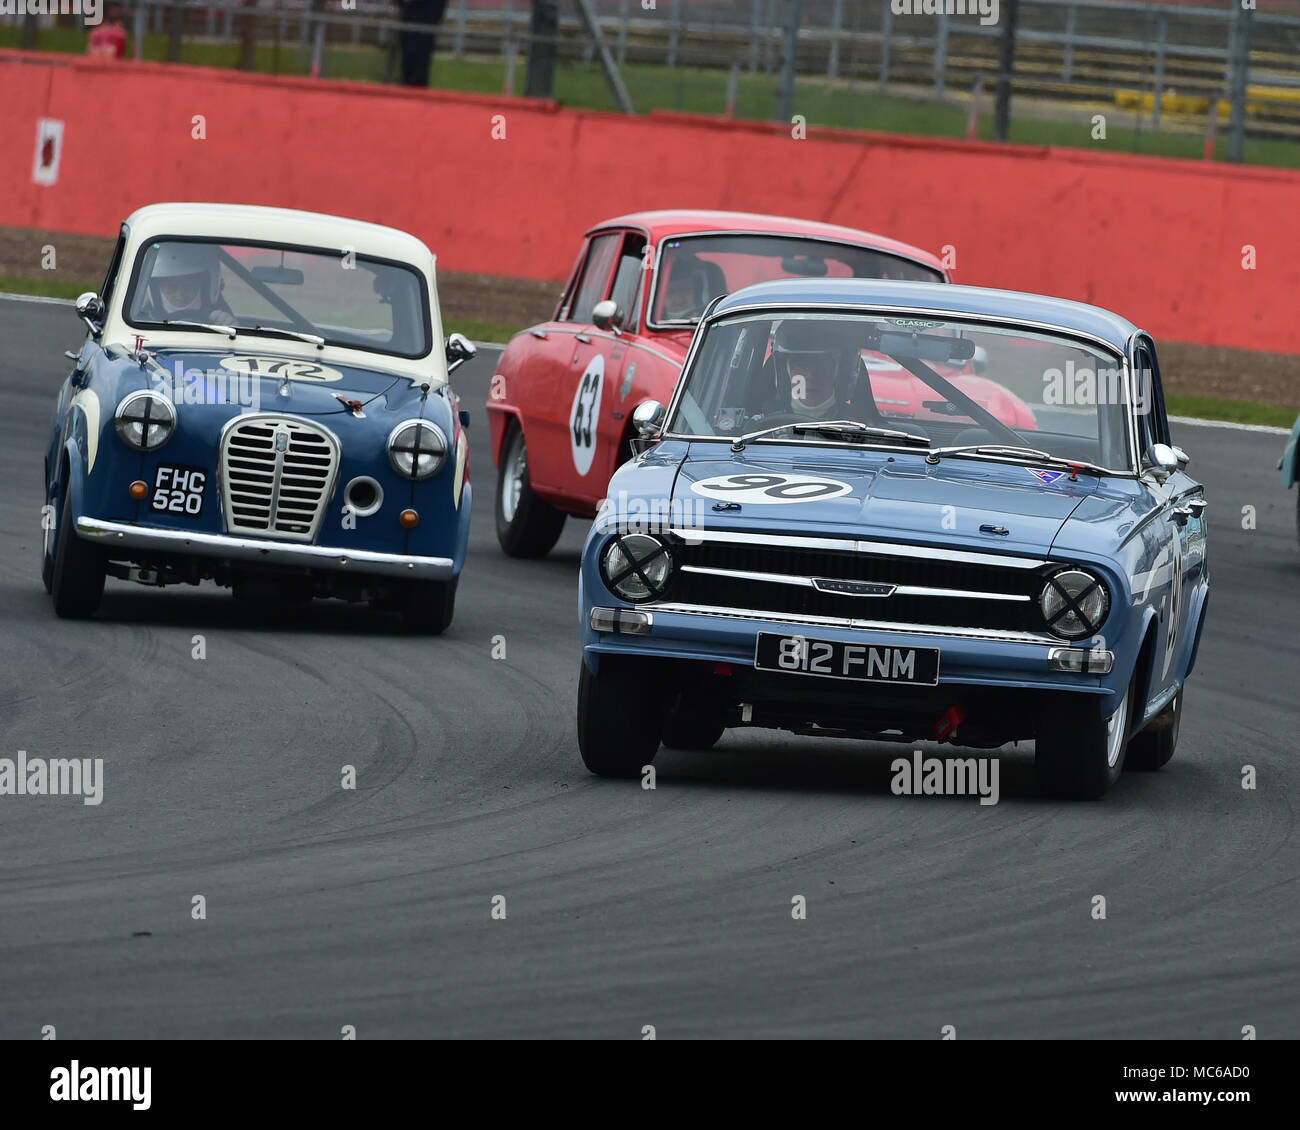 Silverstone, Towcester, Northamptonshire, England, Sunday 1st April 2018. Paul Clayson, Vauxhall VX4/90, in the HRDC Coys Trophy event held on the TCR Stock Photo